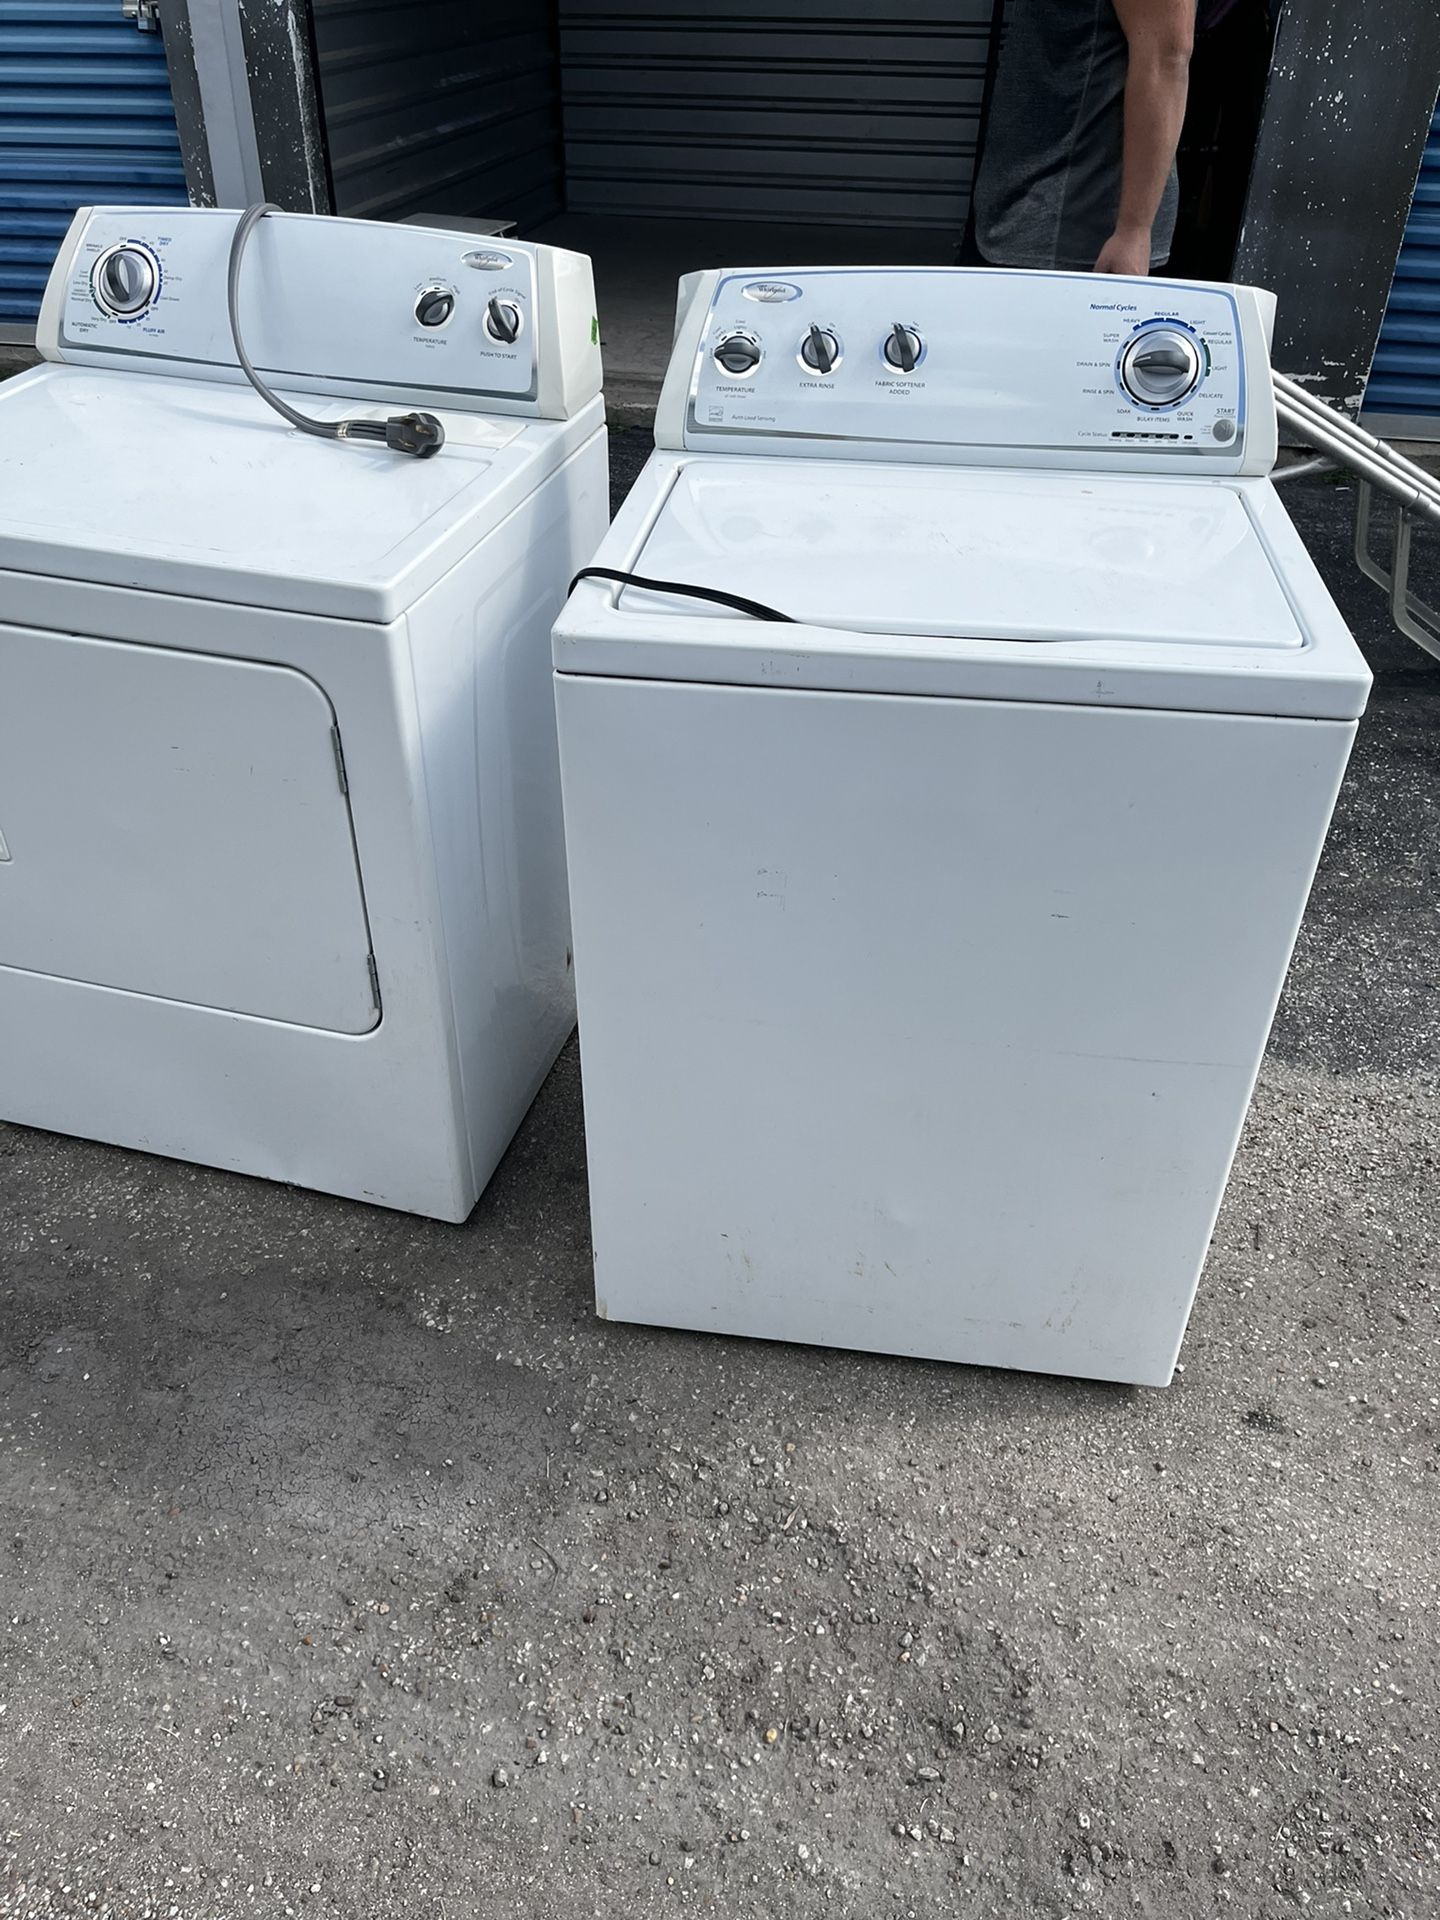 WASHER AND DRYER BOUGHT AND ENDED UP NOT NEEDING THEM.